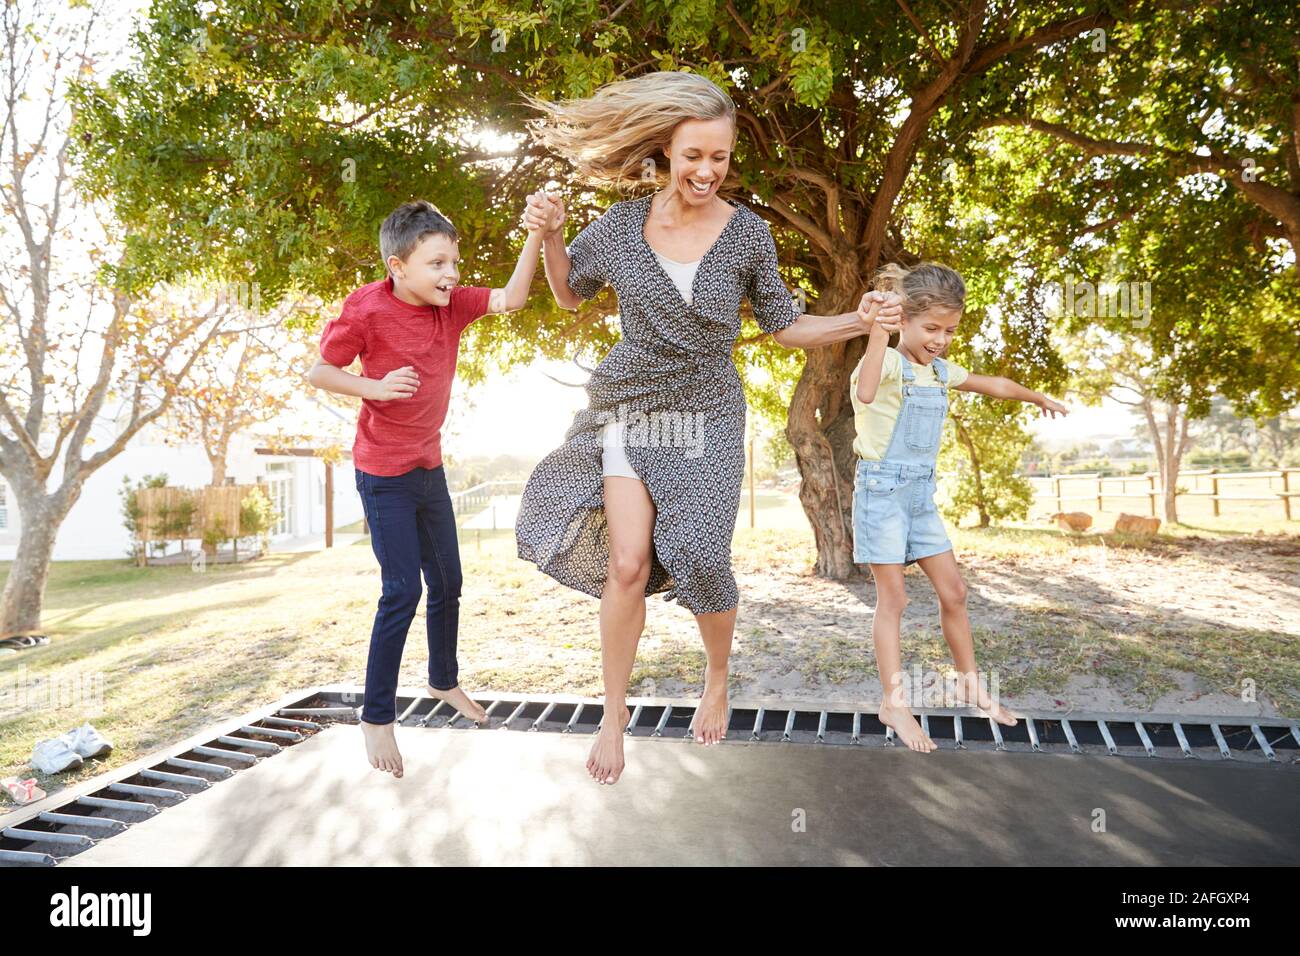 Mother Playing With Children On Outdoor Trampoline In Garden Stock Photo